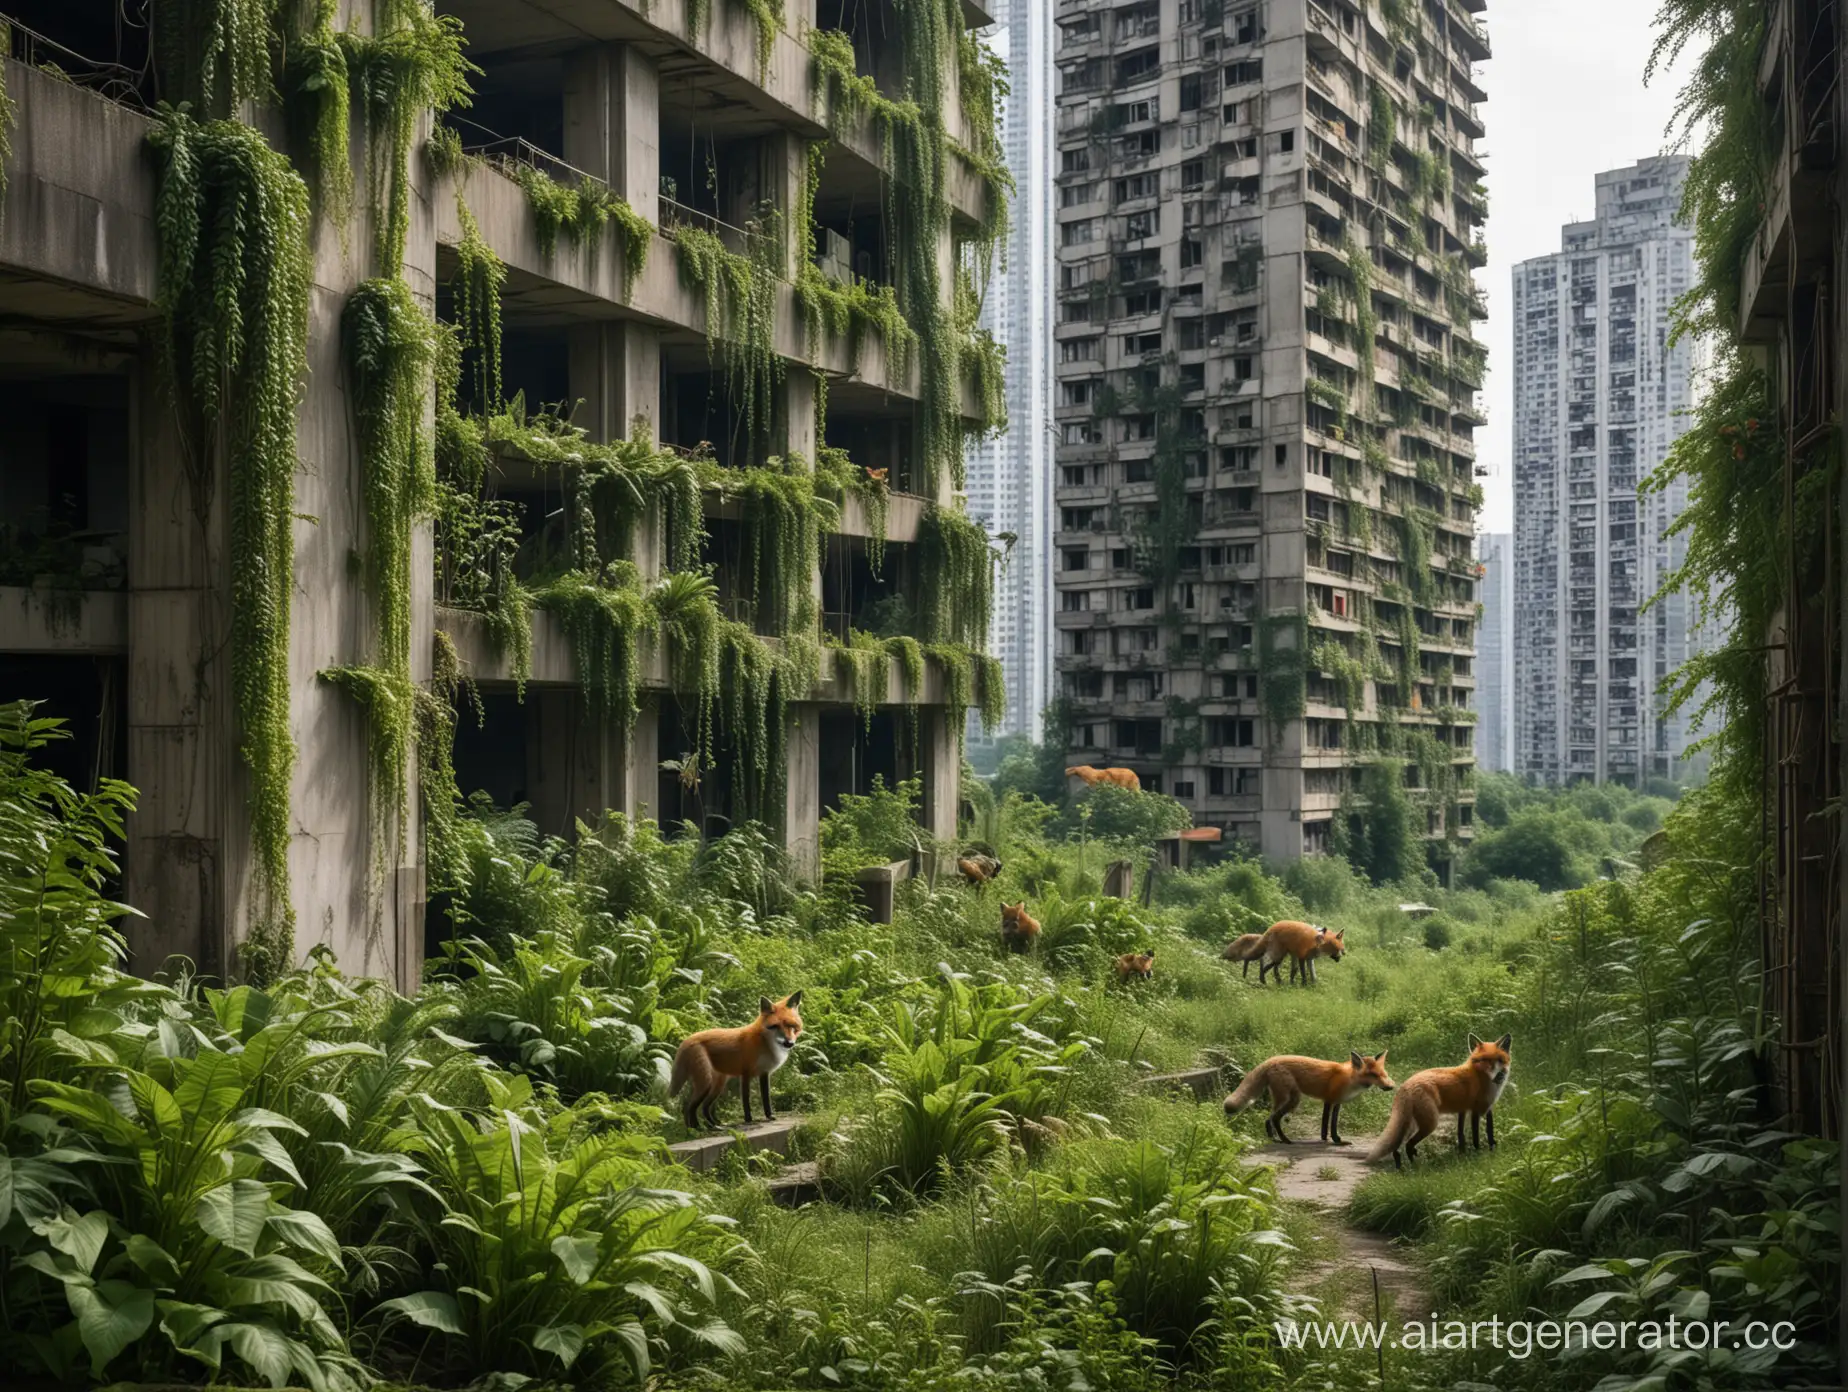 An abandoned high-rise city covered with plants, where a family of foxes walks around